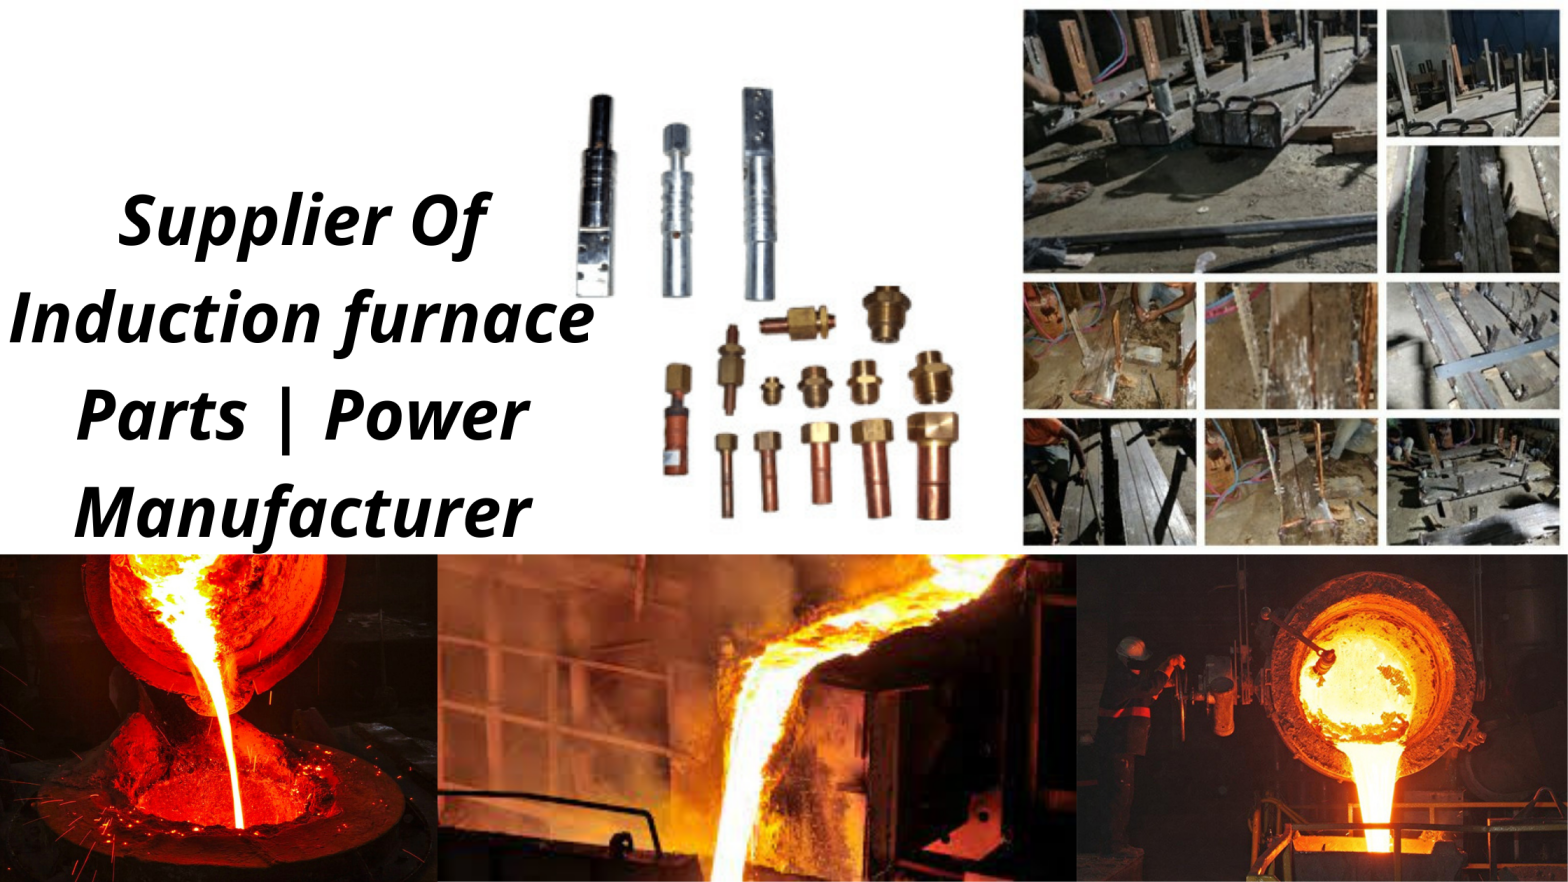 Supplier Of Induction Furnace Parts